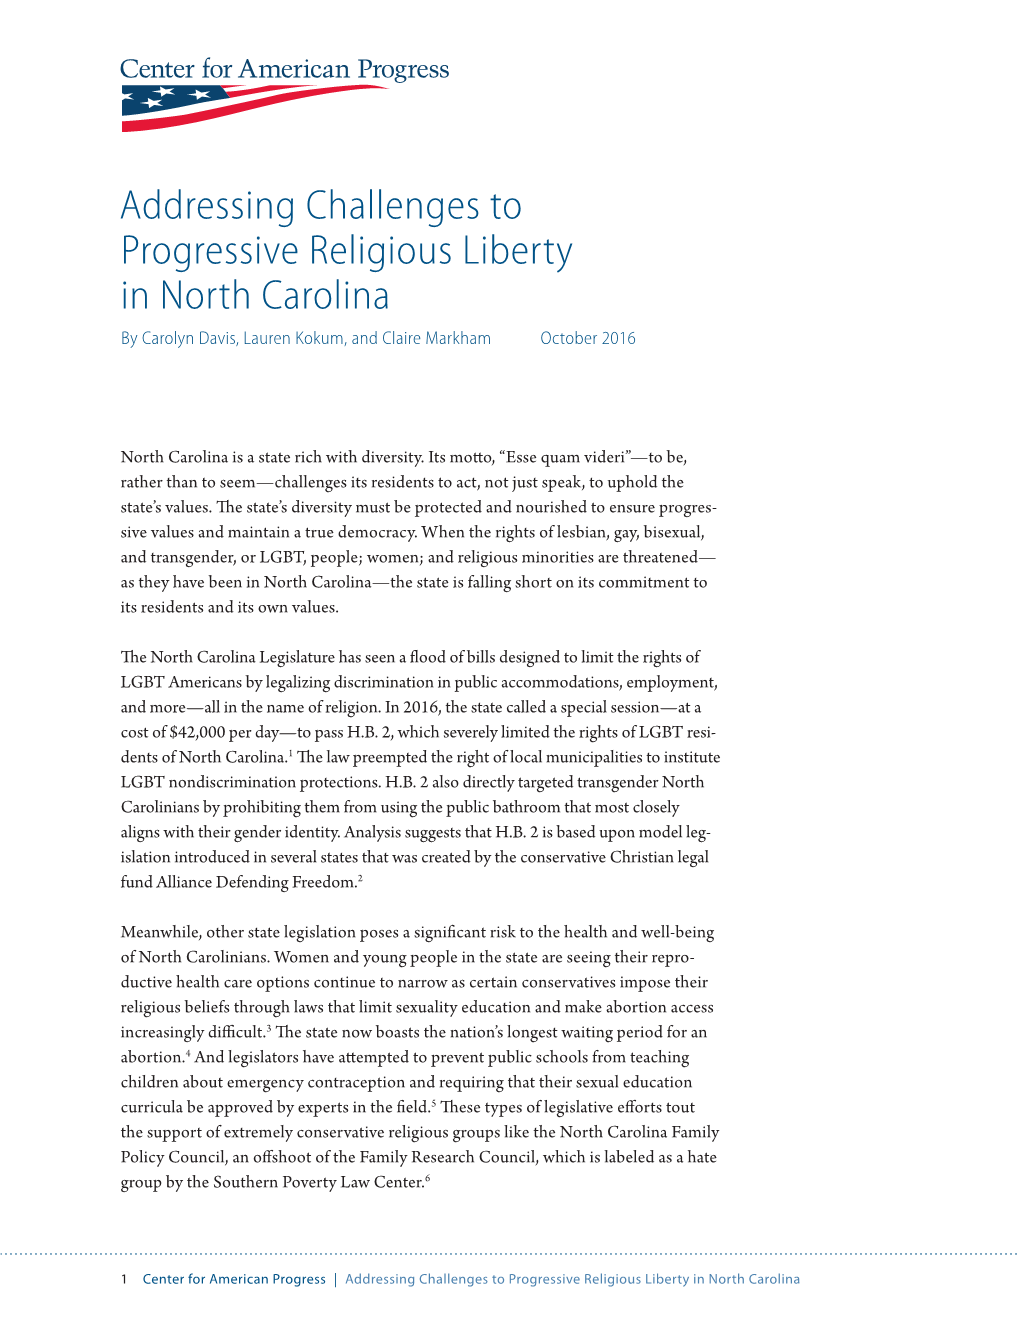 Addressing Challenges to Progressive Religious Liberty in North Carolina by Carolyn Davis, Lauren Kokum, and Claire Markham October 2016